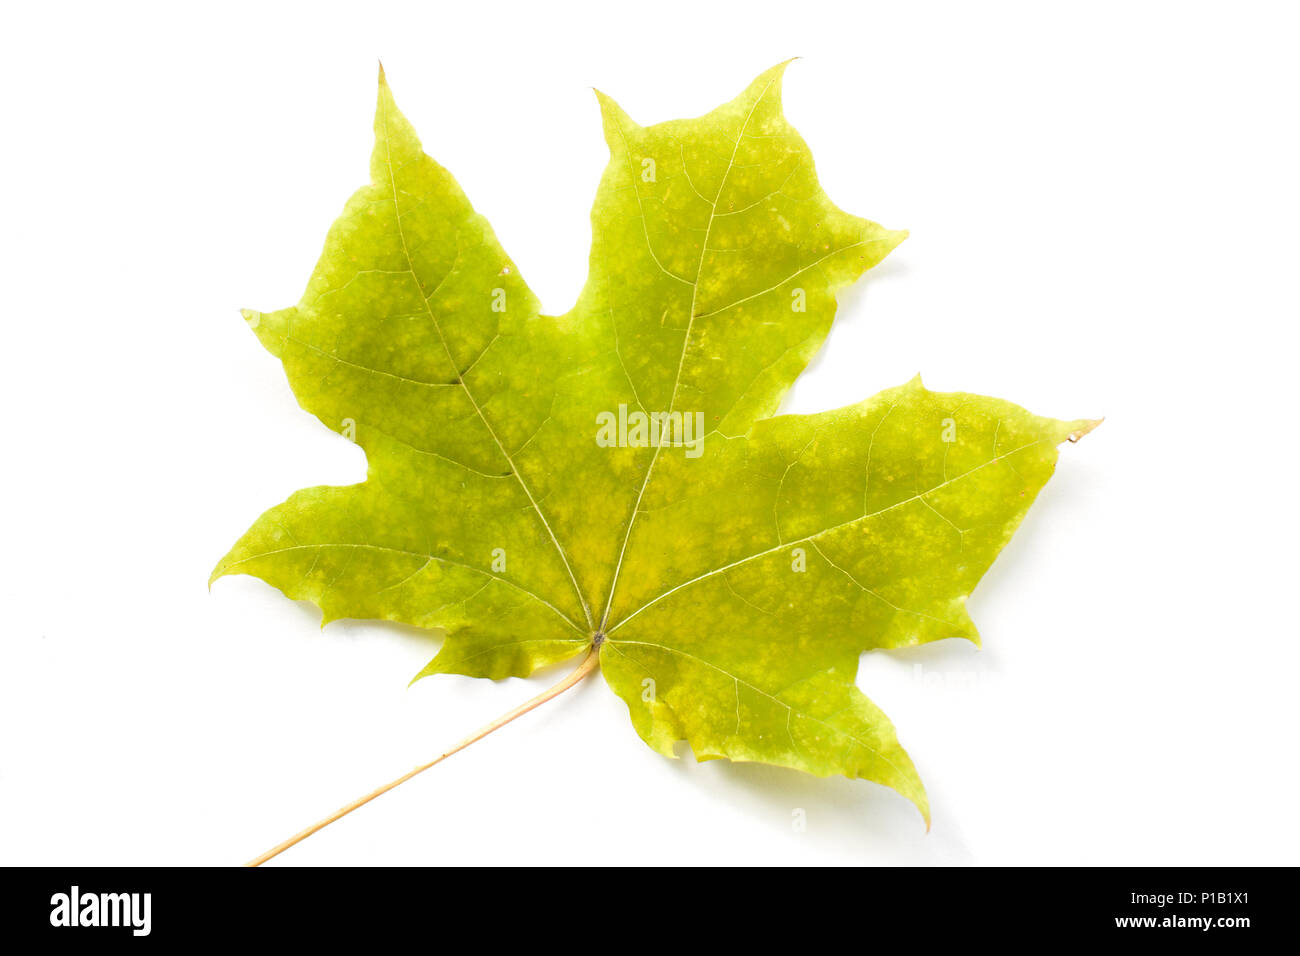 Close-up green maple leaf on white background. Stock Photo